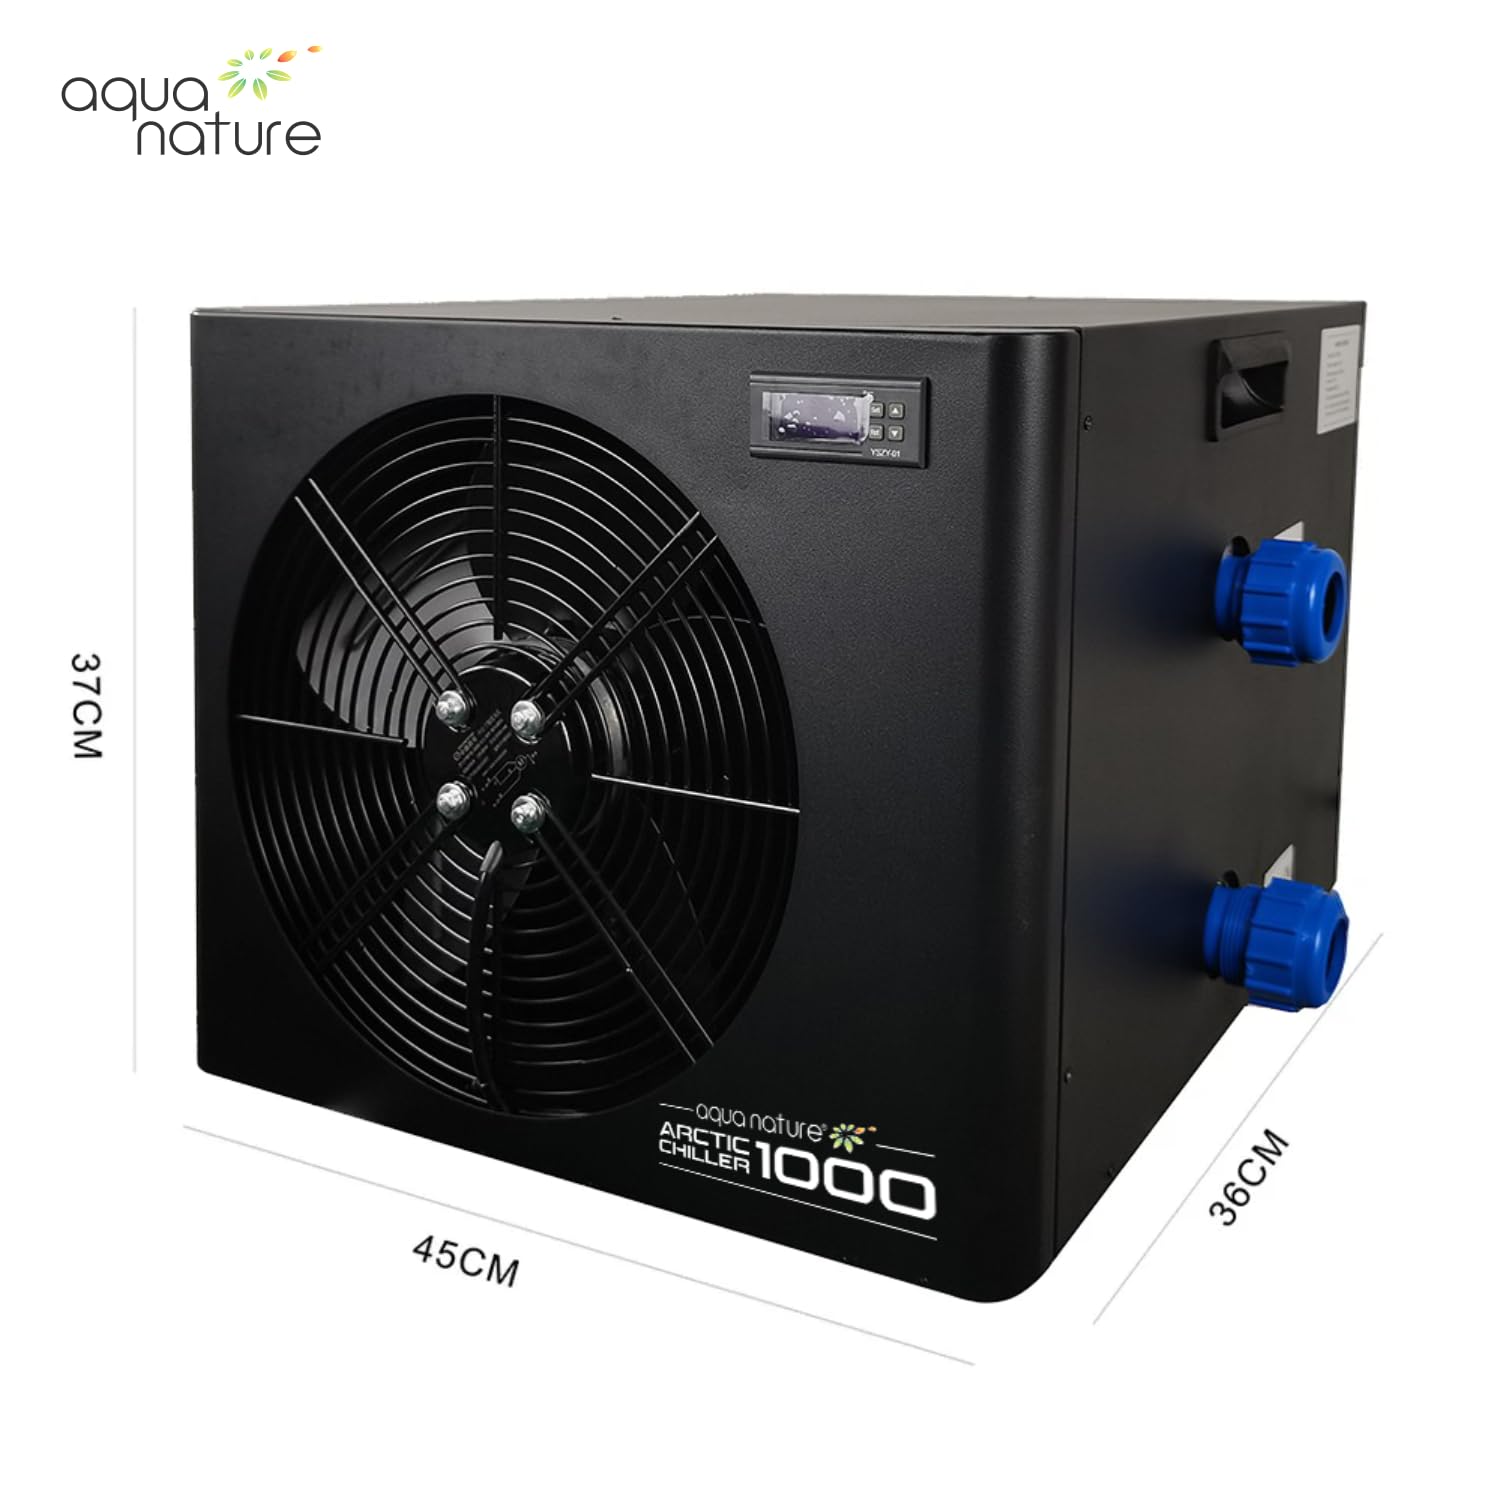 Arctic Chiller AAC-1000